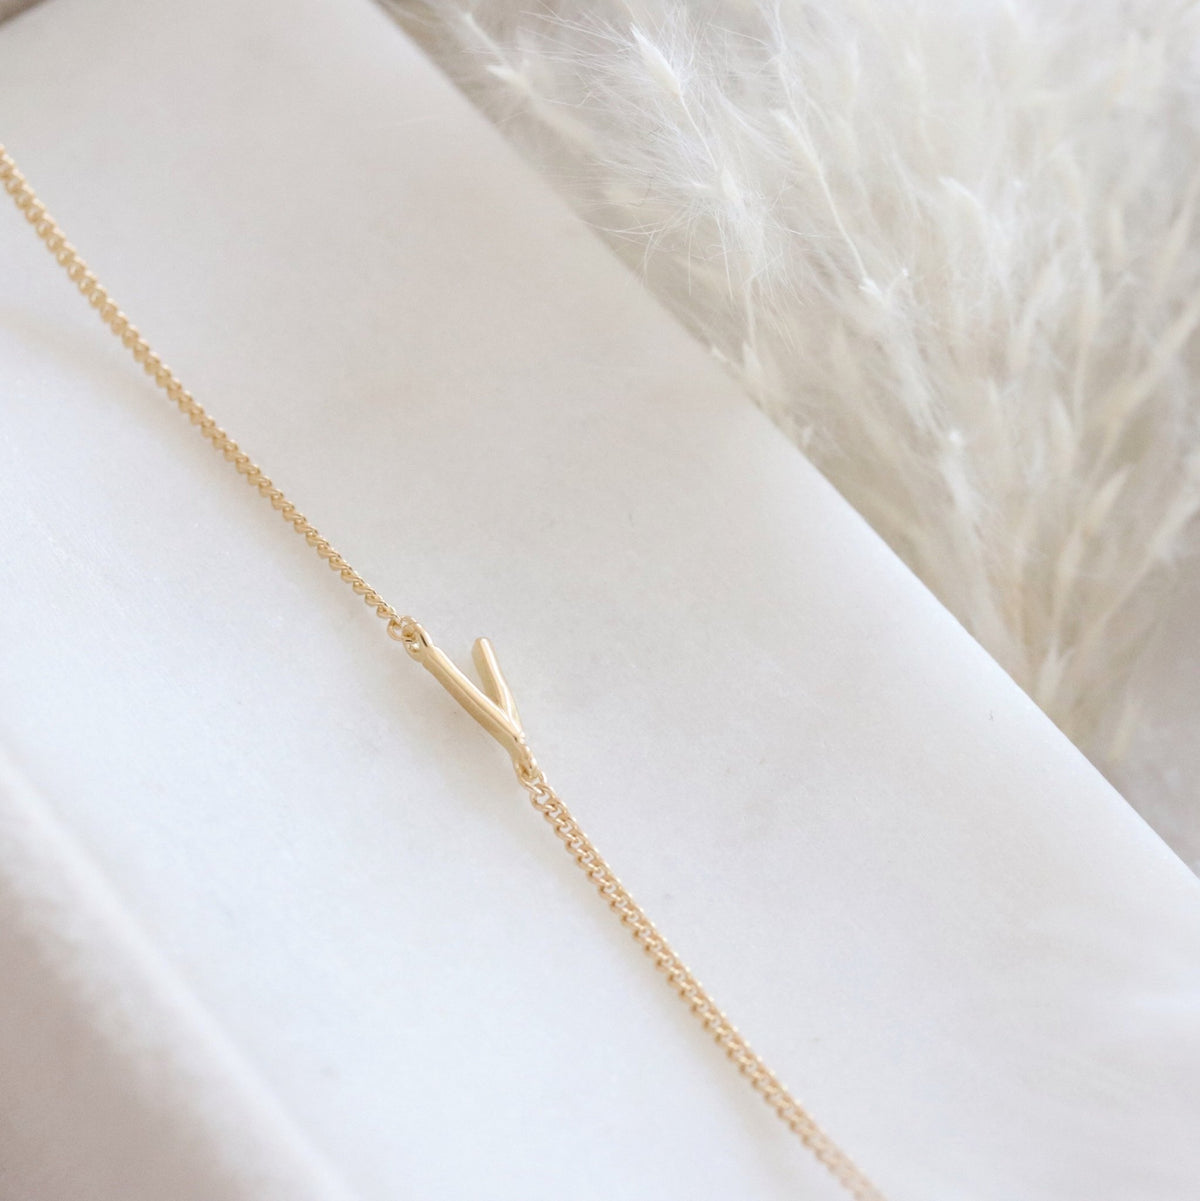 NOTABLE OFFSET INITIAL NECKLACE - V - GOLD - SO PRETTY CARA COTTER